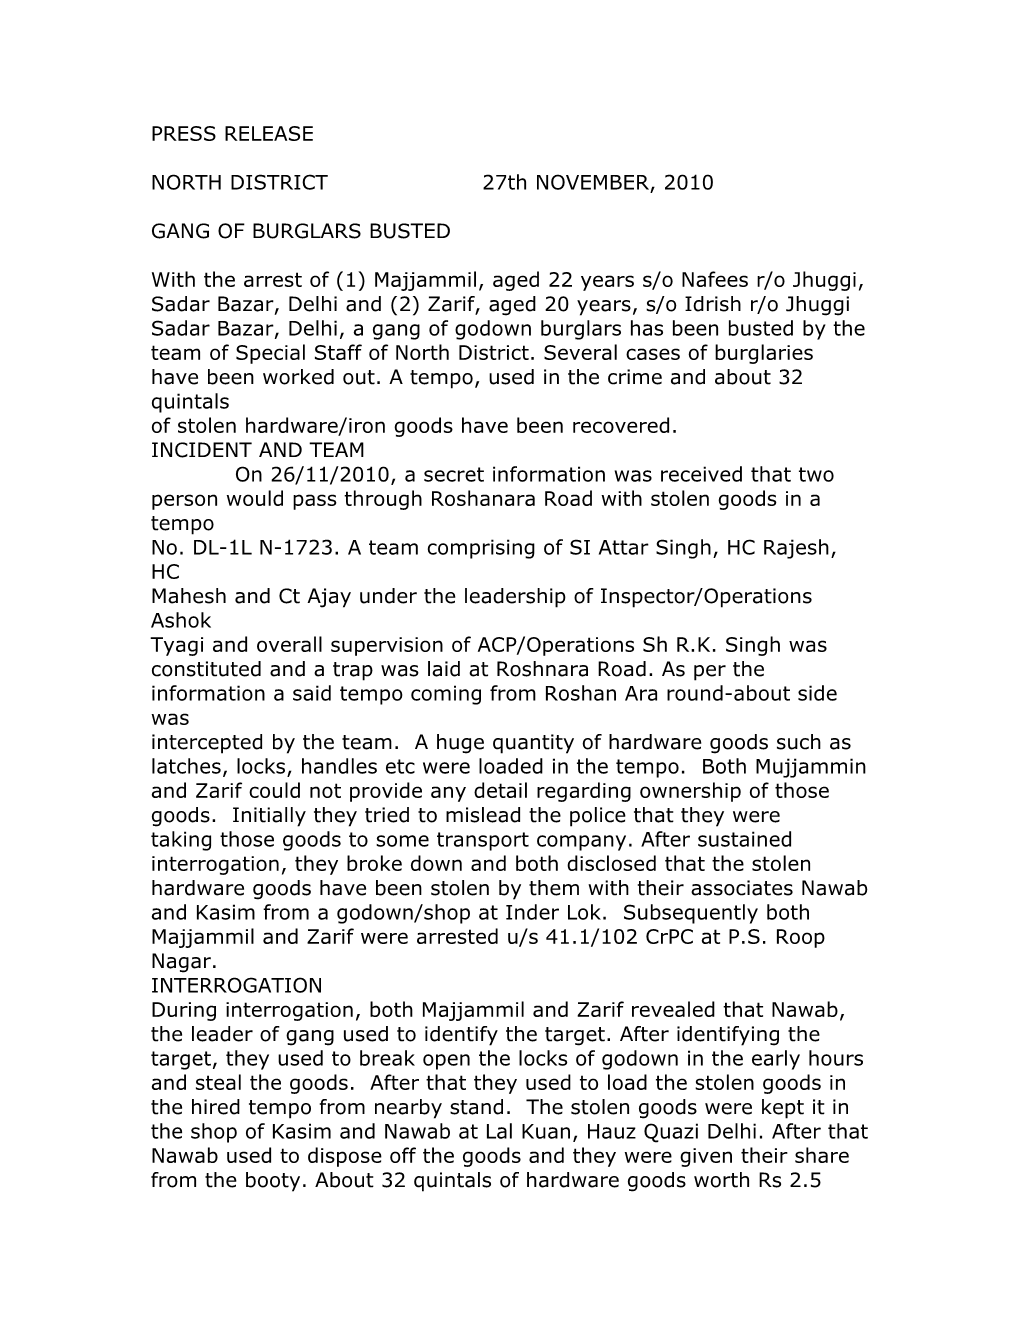 PRESS RELEASE NORTH DISTRICT 27Th NOVEMBER, 2010 GANG of BURGLARS BUSTED with the Arrest